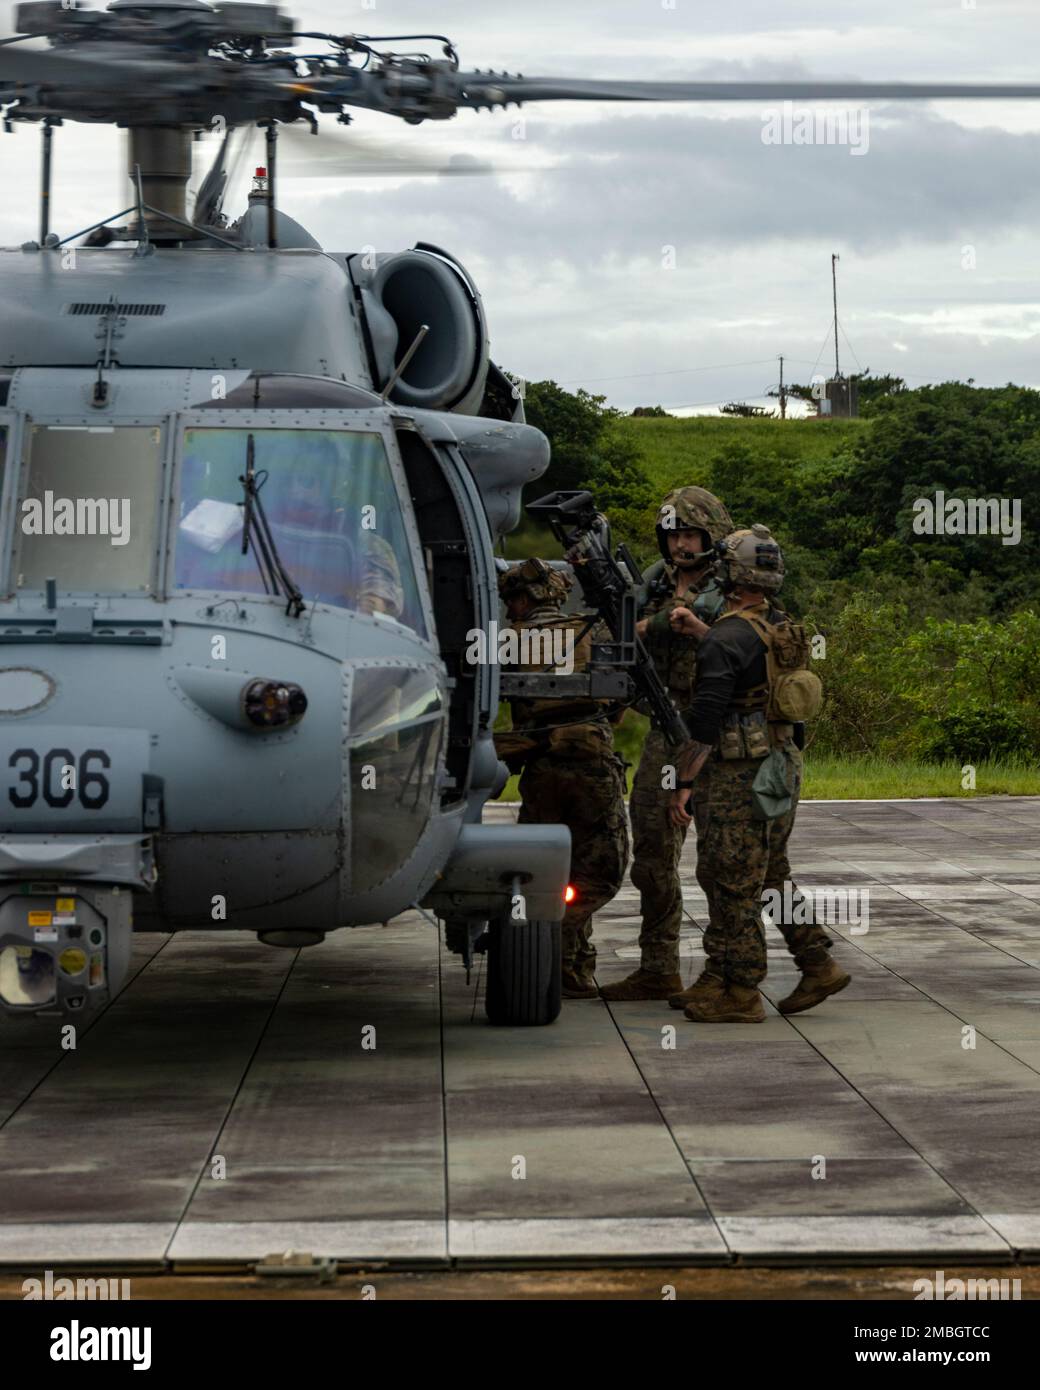 U.S. service members exit a U.S. Navy Sikorsky SH-60 Seahawk Helicopter with Helicopter Sea Combat Squadron 85, after an aerial sniper training during an Urban Sniper Course on Camp Schwab, Okinawa, Japan, June 15, 2022. The aerial sniper training was led by Marines and military contractors with the Expeditionary Operations Training Group to enhance participating Marines' skills in urban environments through precision fire and engaging simulated targets from an aircraft. Stock Photo